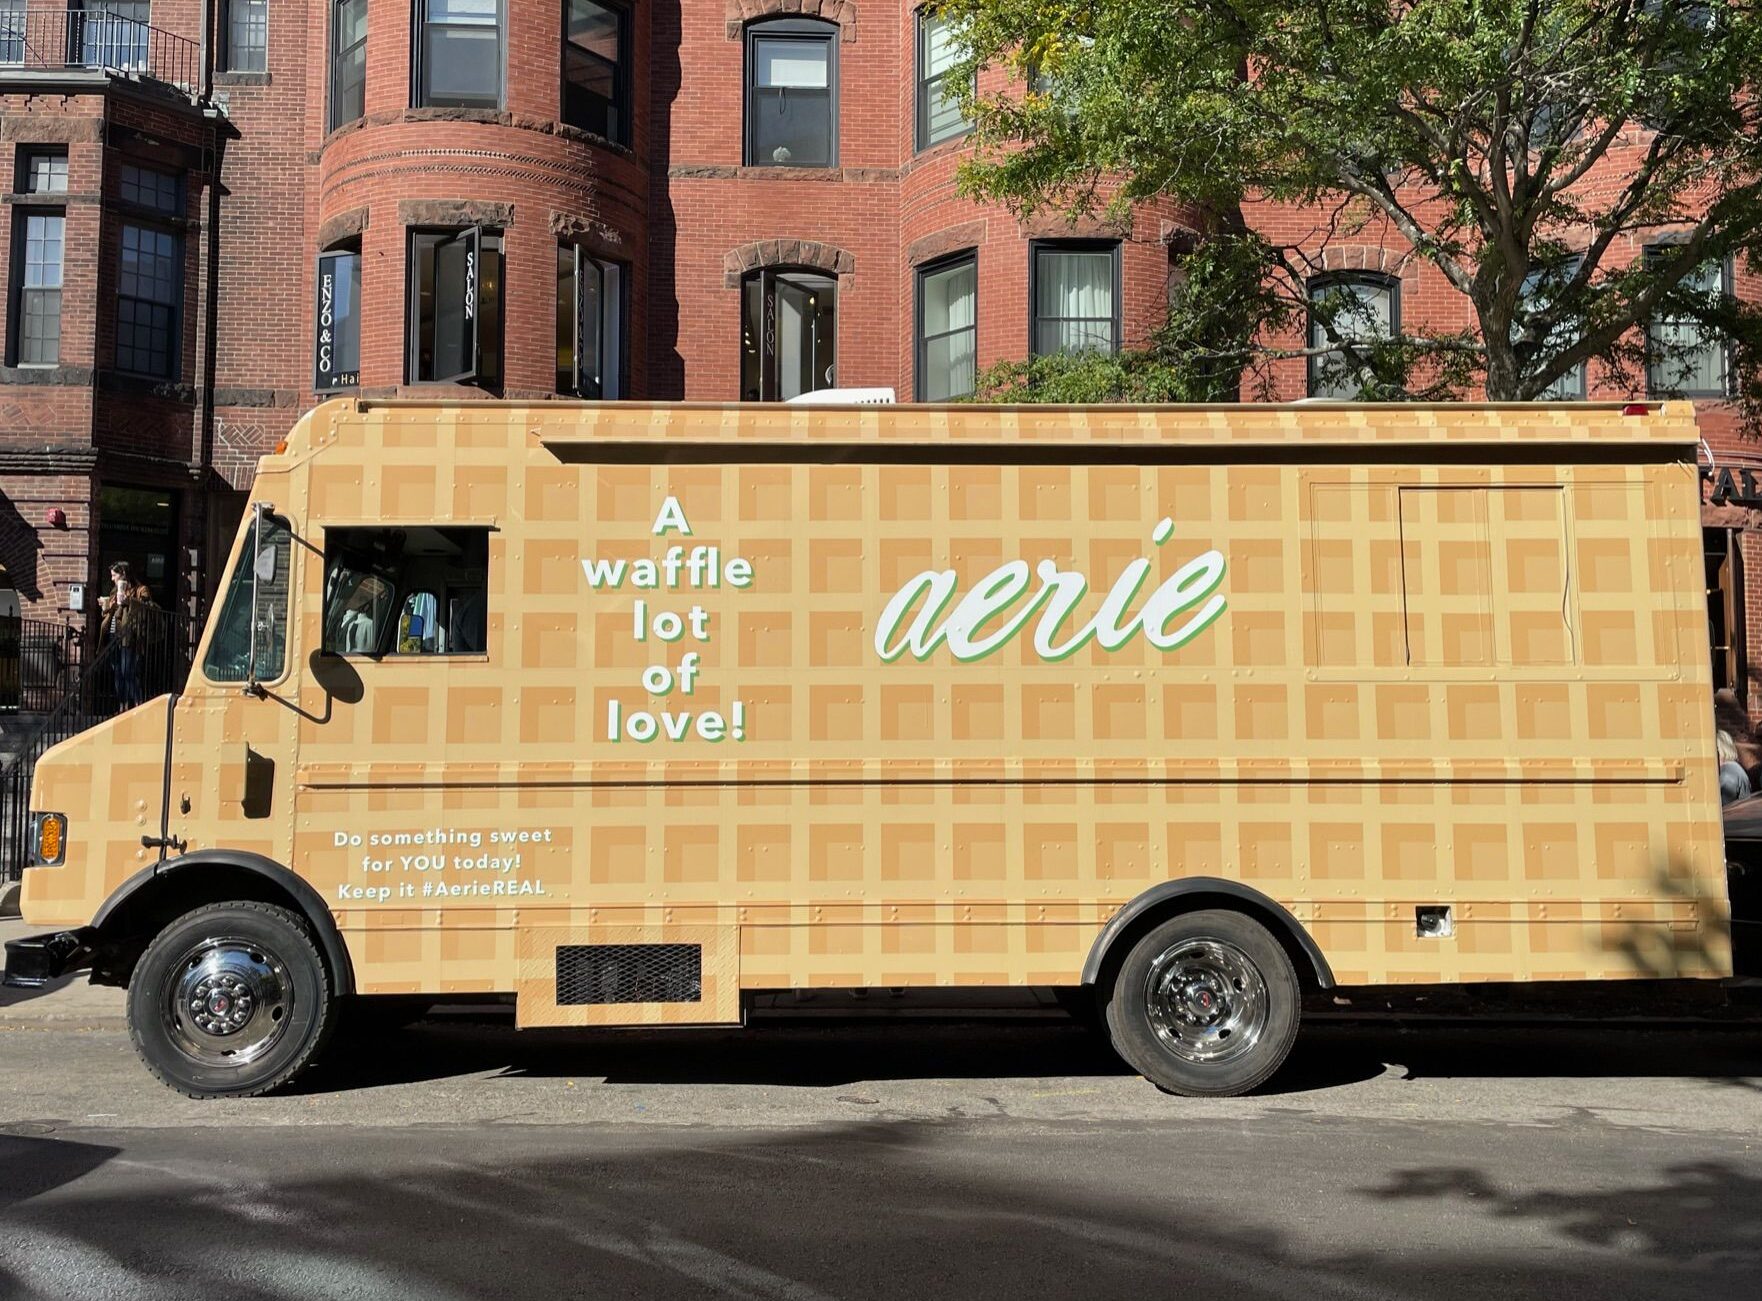 Aerie A Waffle Lot Of Love truck